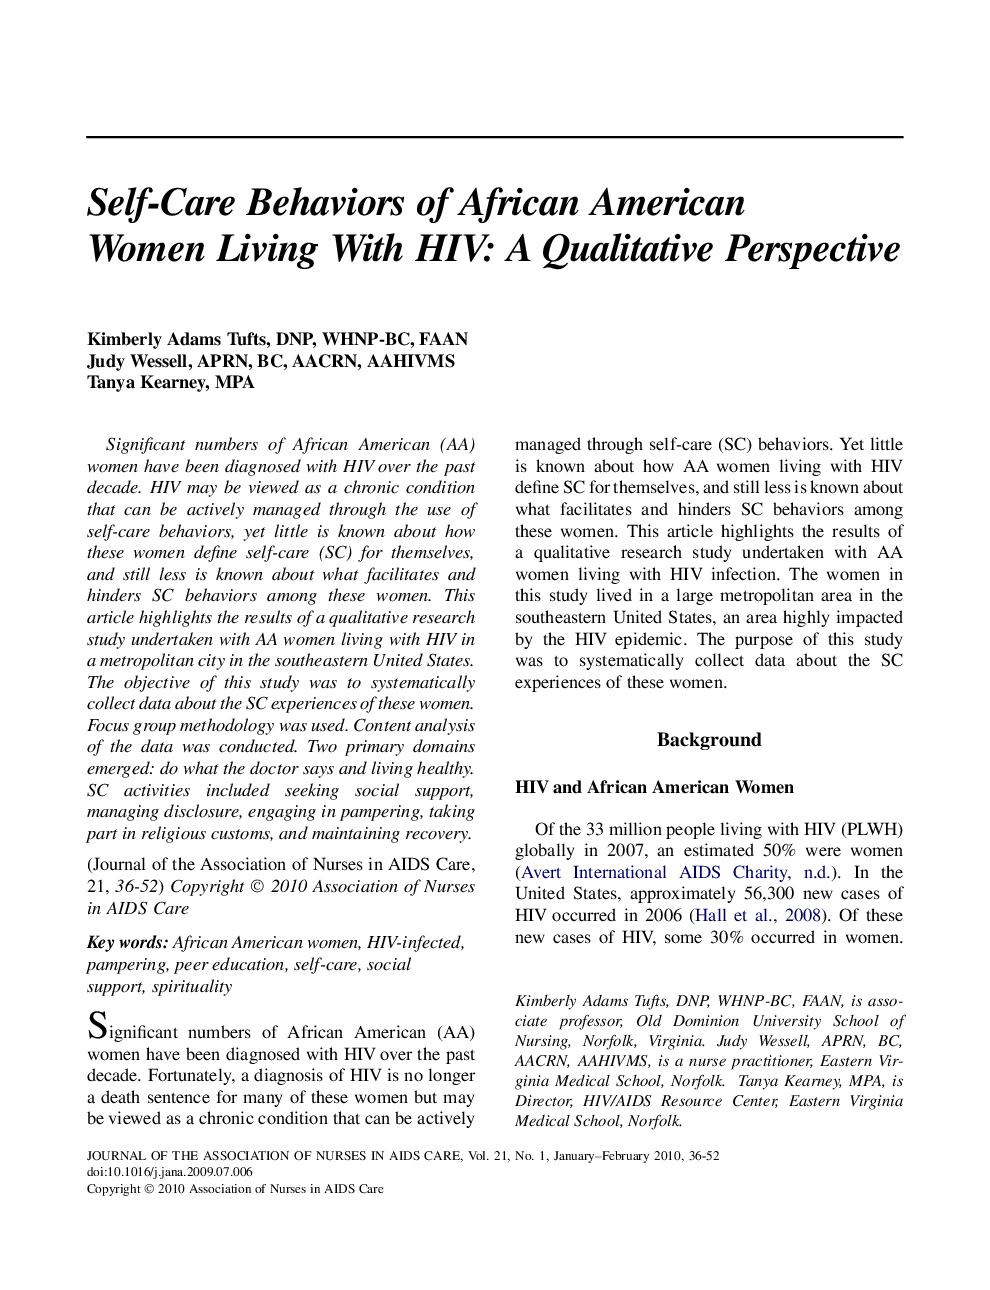 Self-Care Behaviors of African American Women Living With HIV: A Qualitative Perspective